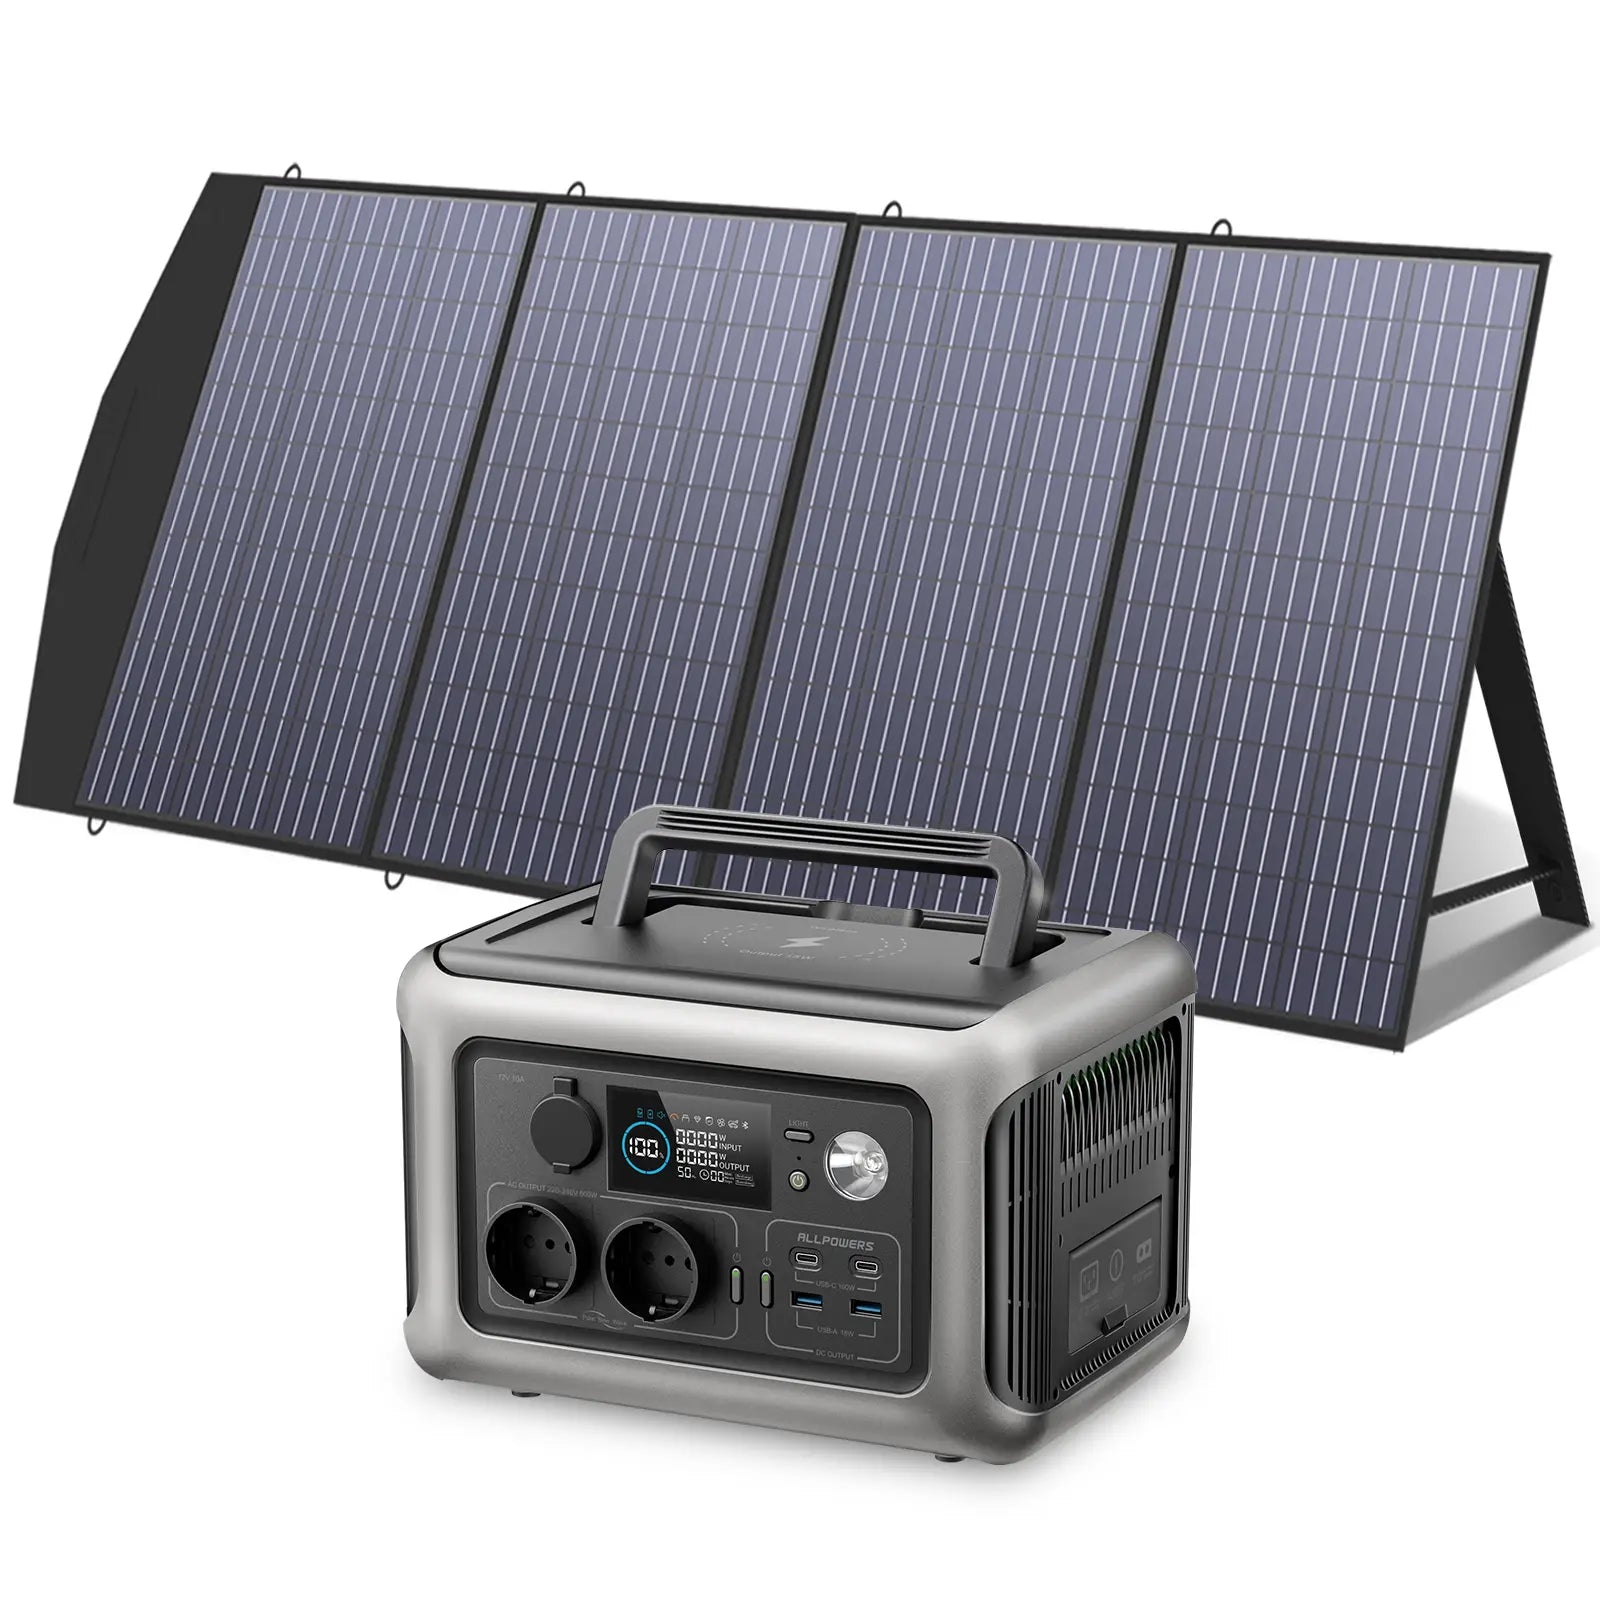 ALLPOWERS R600 Solar Generator 600W Portable Power Station 299Wh with SP033 200W Solar Panel